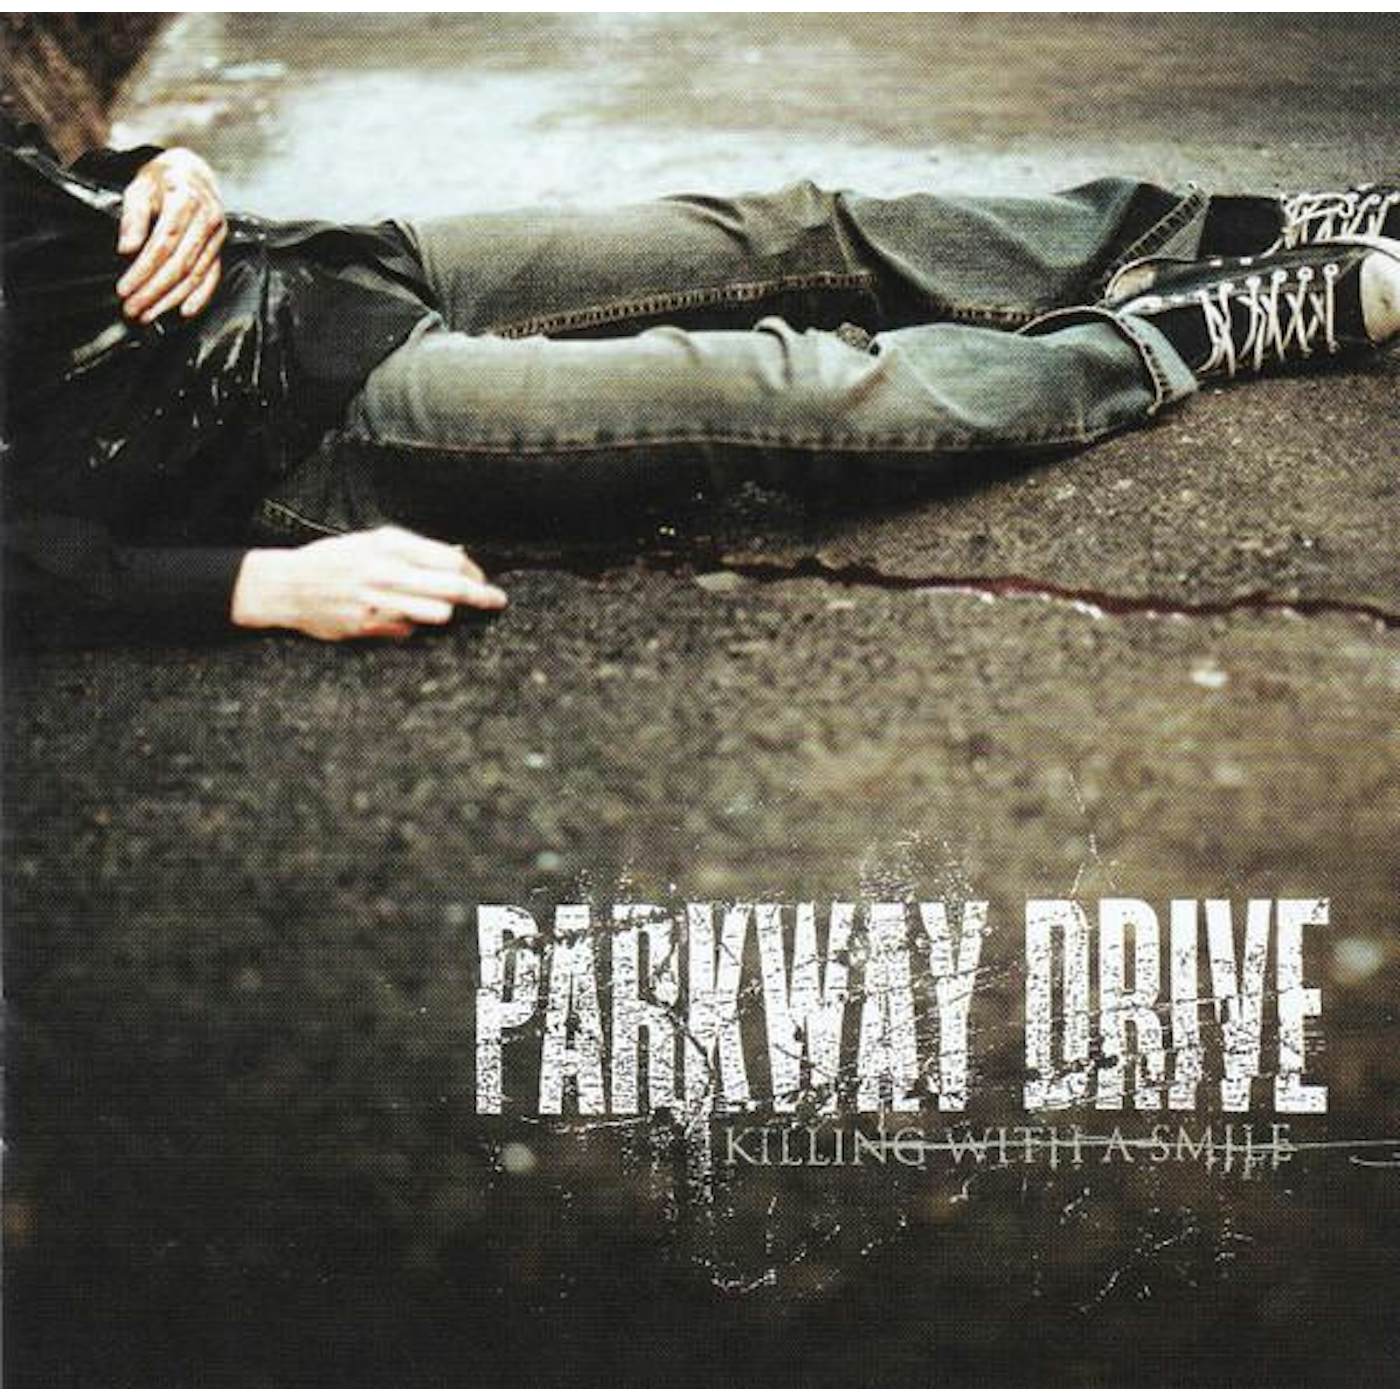 Parkway Drive Killing With A Smile Vinyl Record